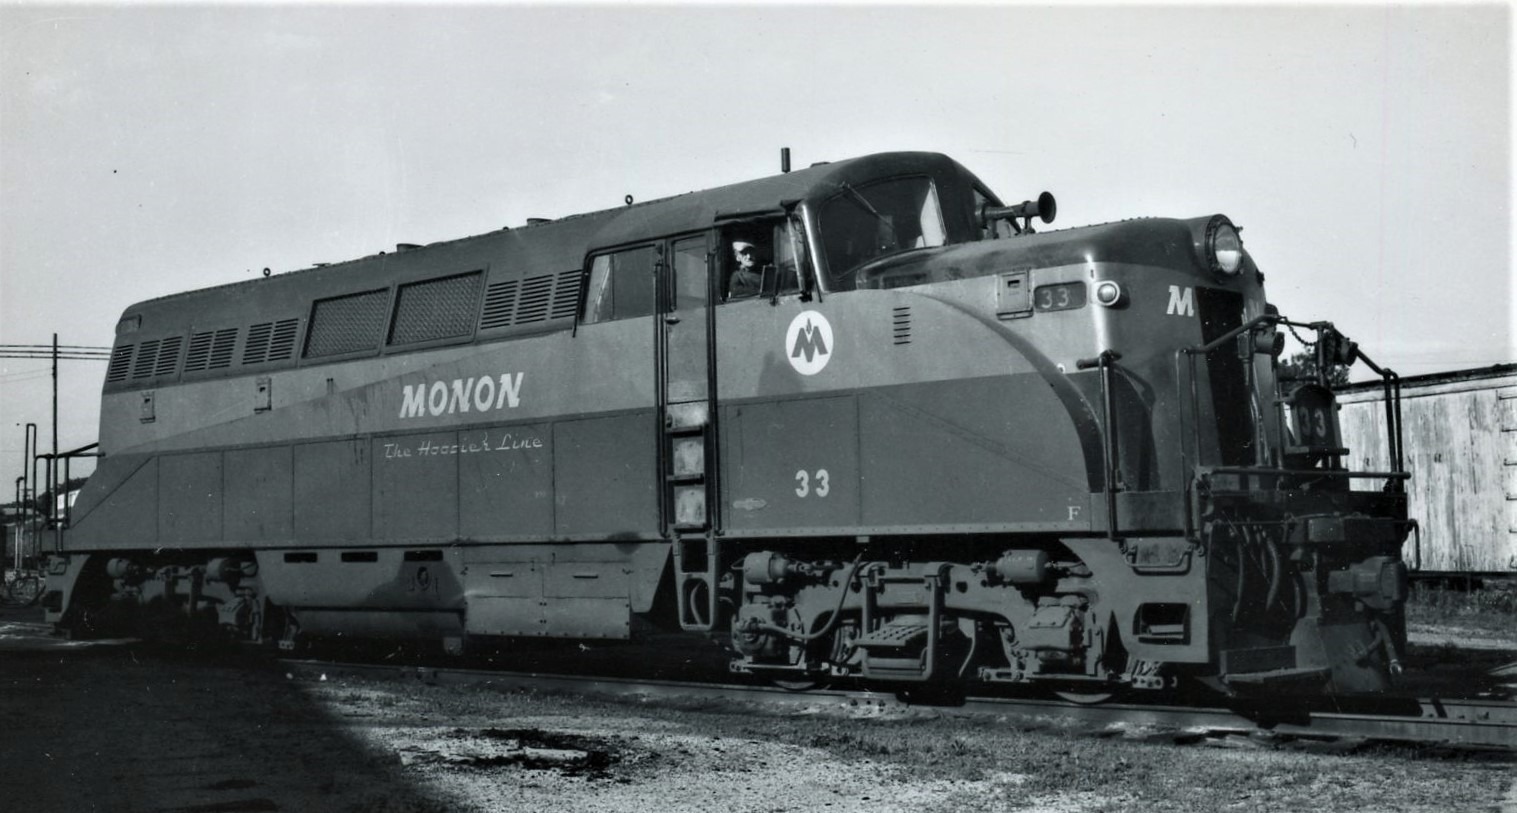 Monon | Chicago Indianapolis and Louisville Railroad | Indianapolis, Indiana | EMD Class BL2 #33 diesel-electric locomotive | May 31,1960 | Arthur B. Johnson photograph | Elmer Kremkow collection